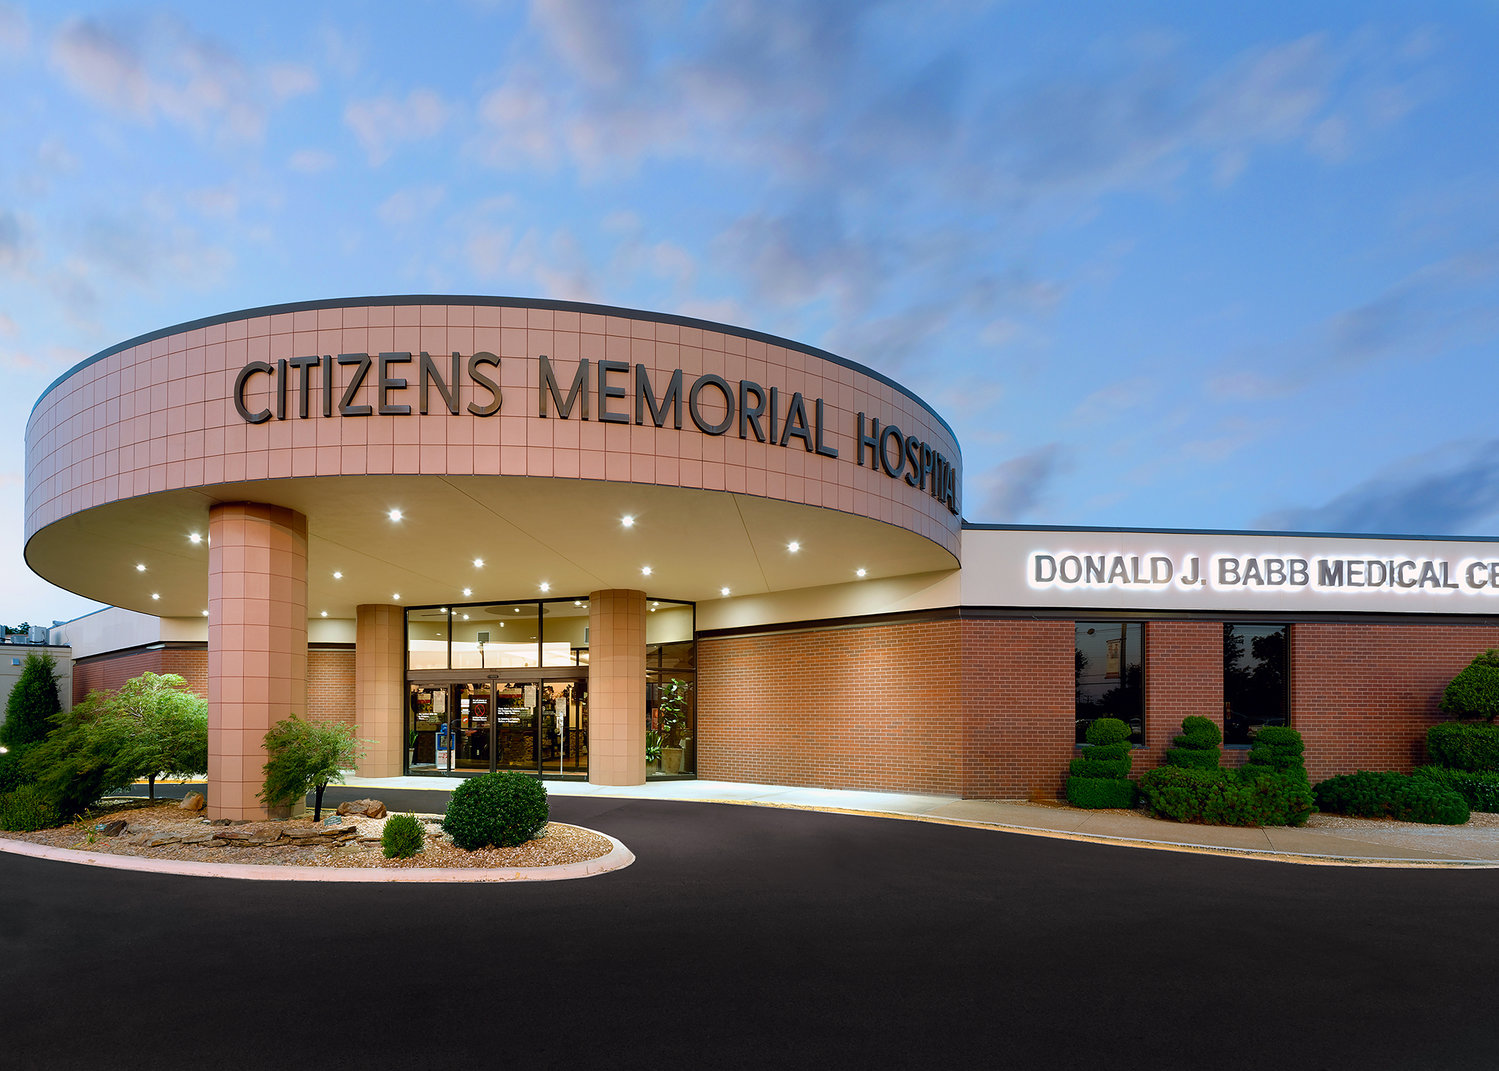 Citizens Memorial Hospital produces more than $500 million in annual revenue.